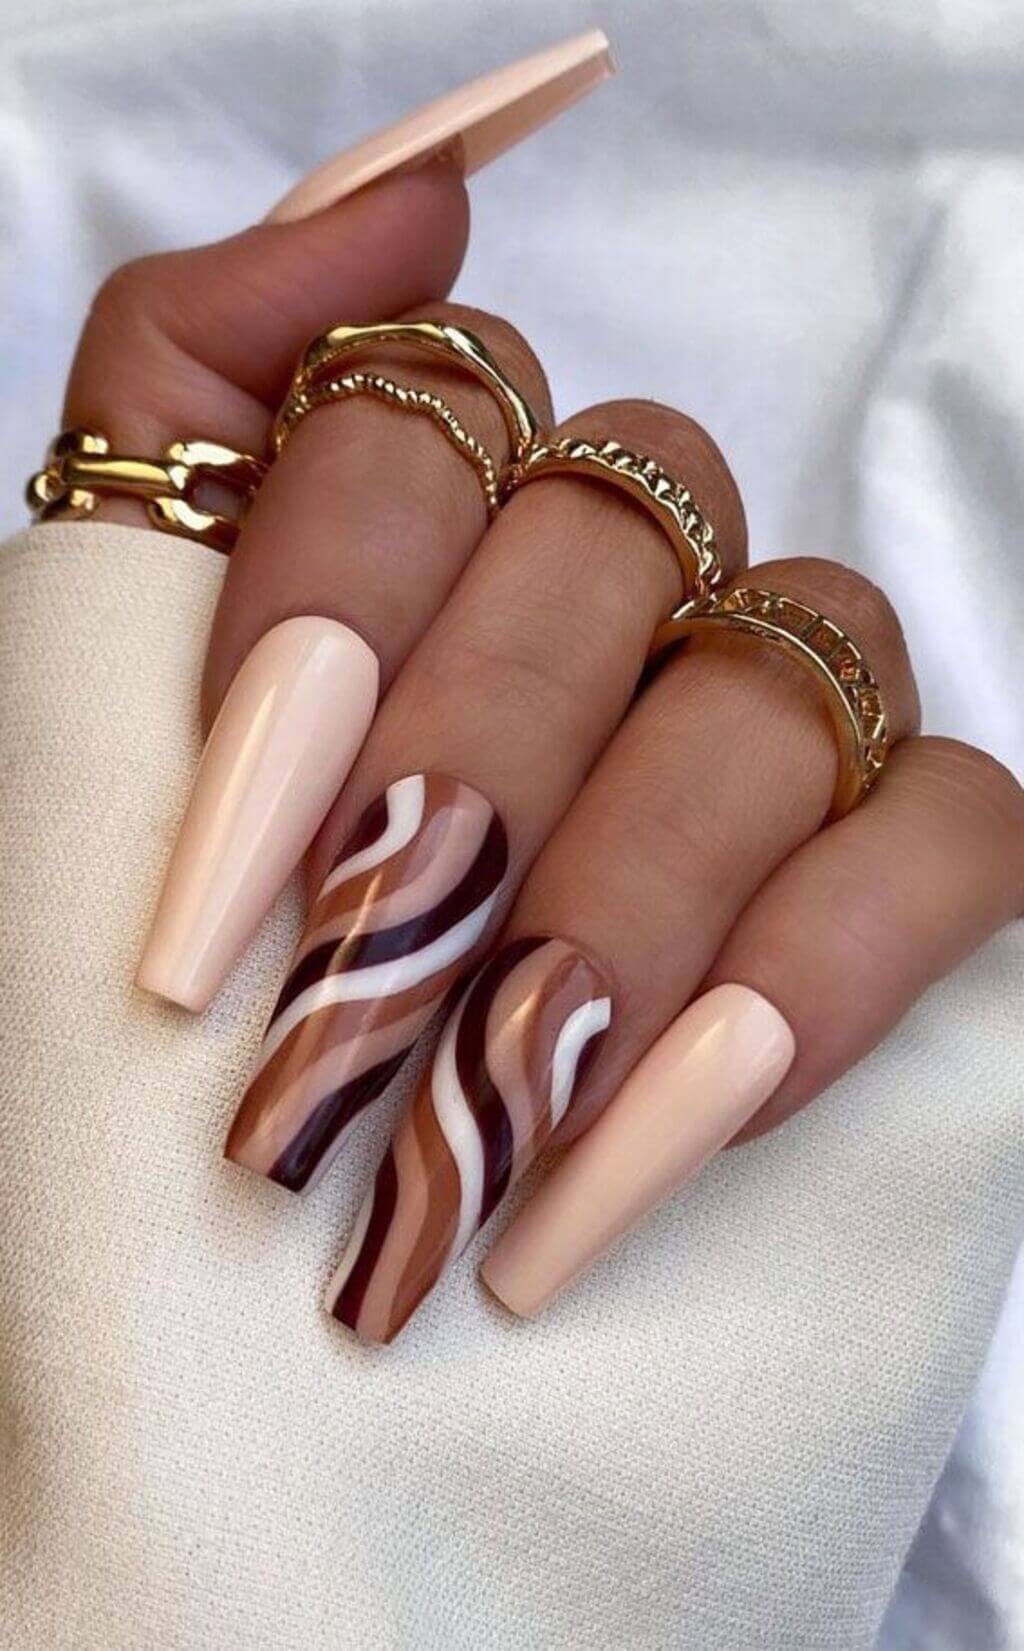 Acrylic Nails in Chocolate Brown Coffin